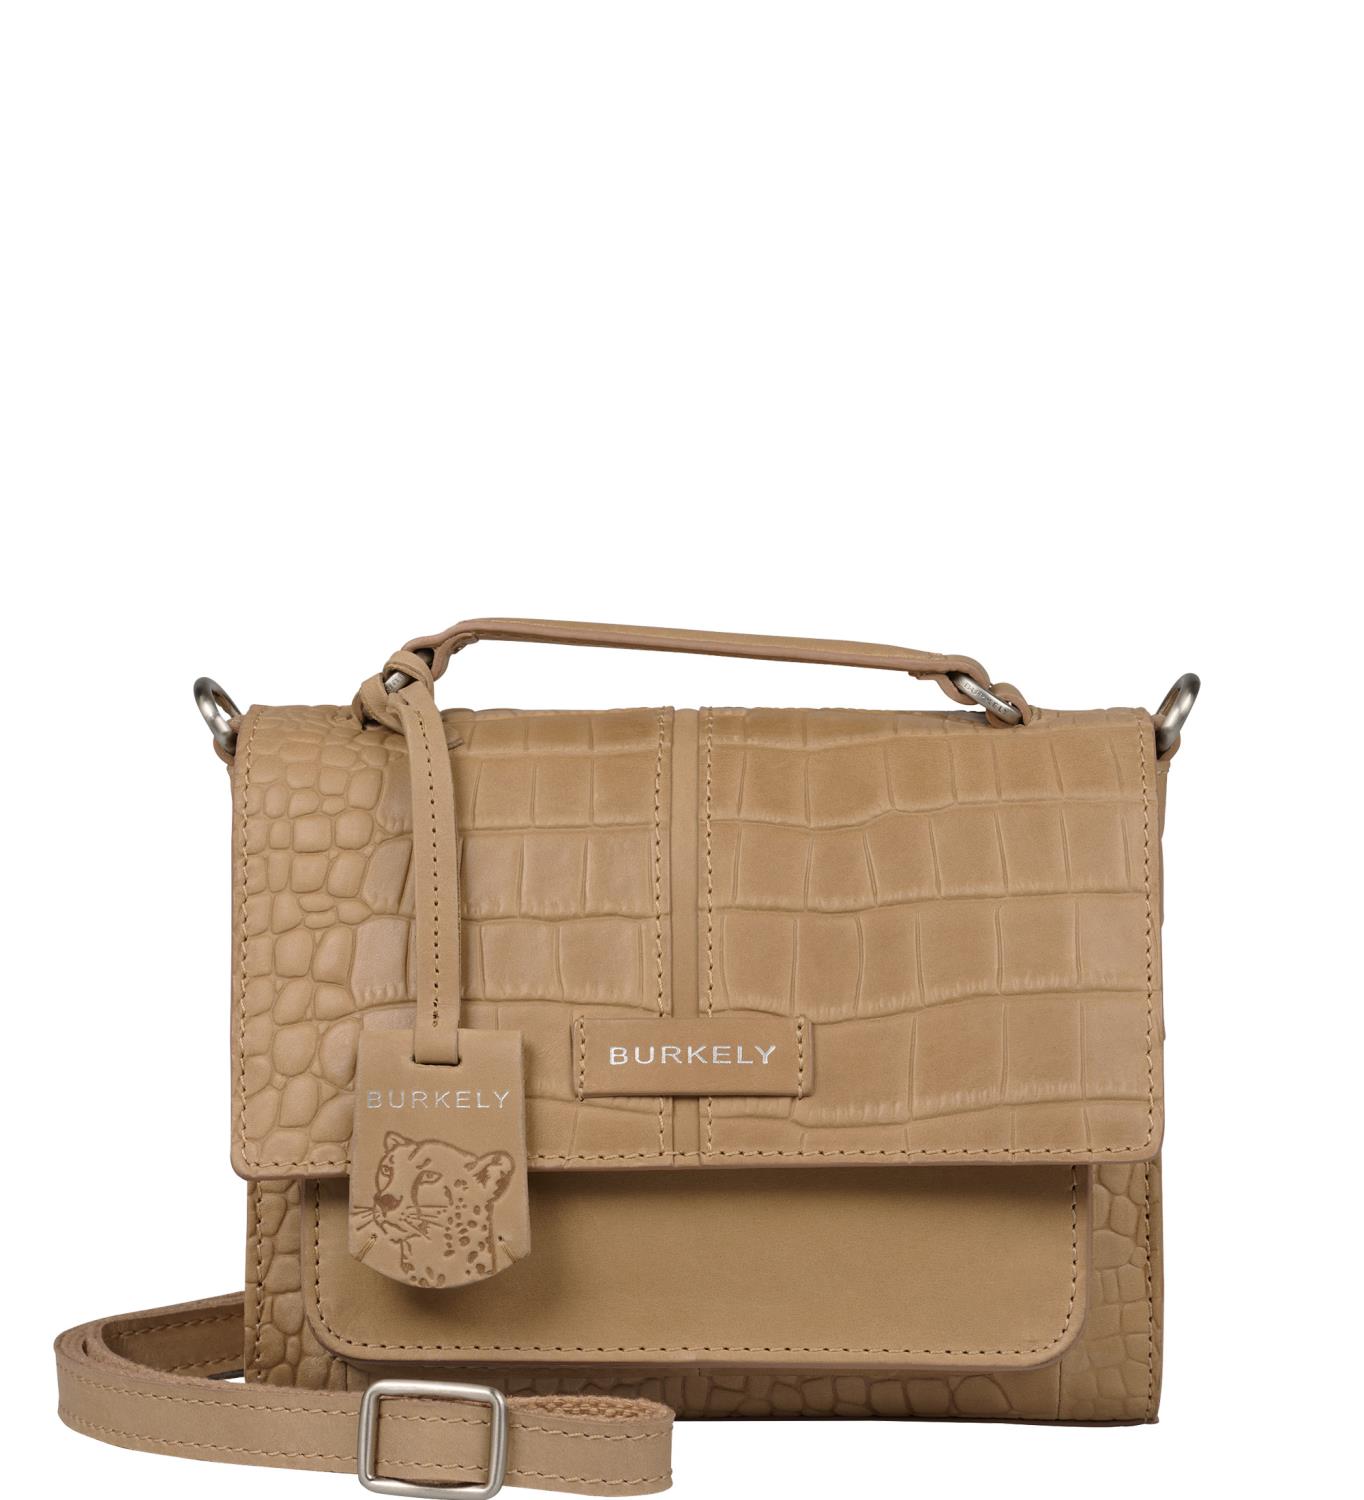 Burkely COOL COLBIE Citybag small Beige